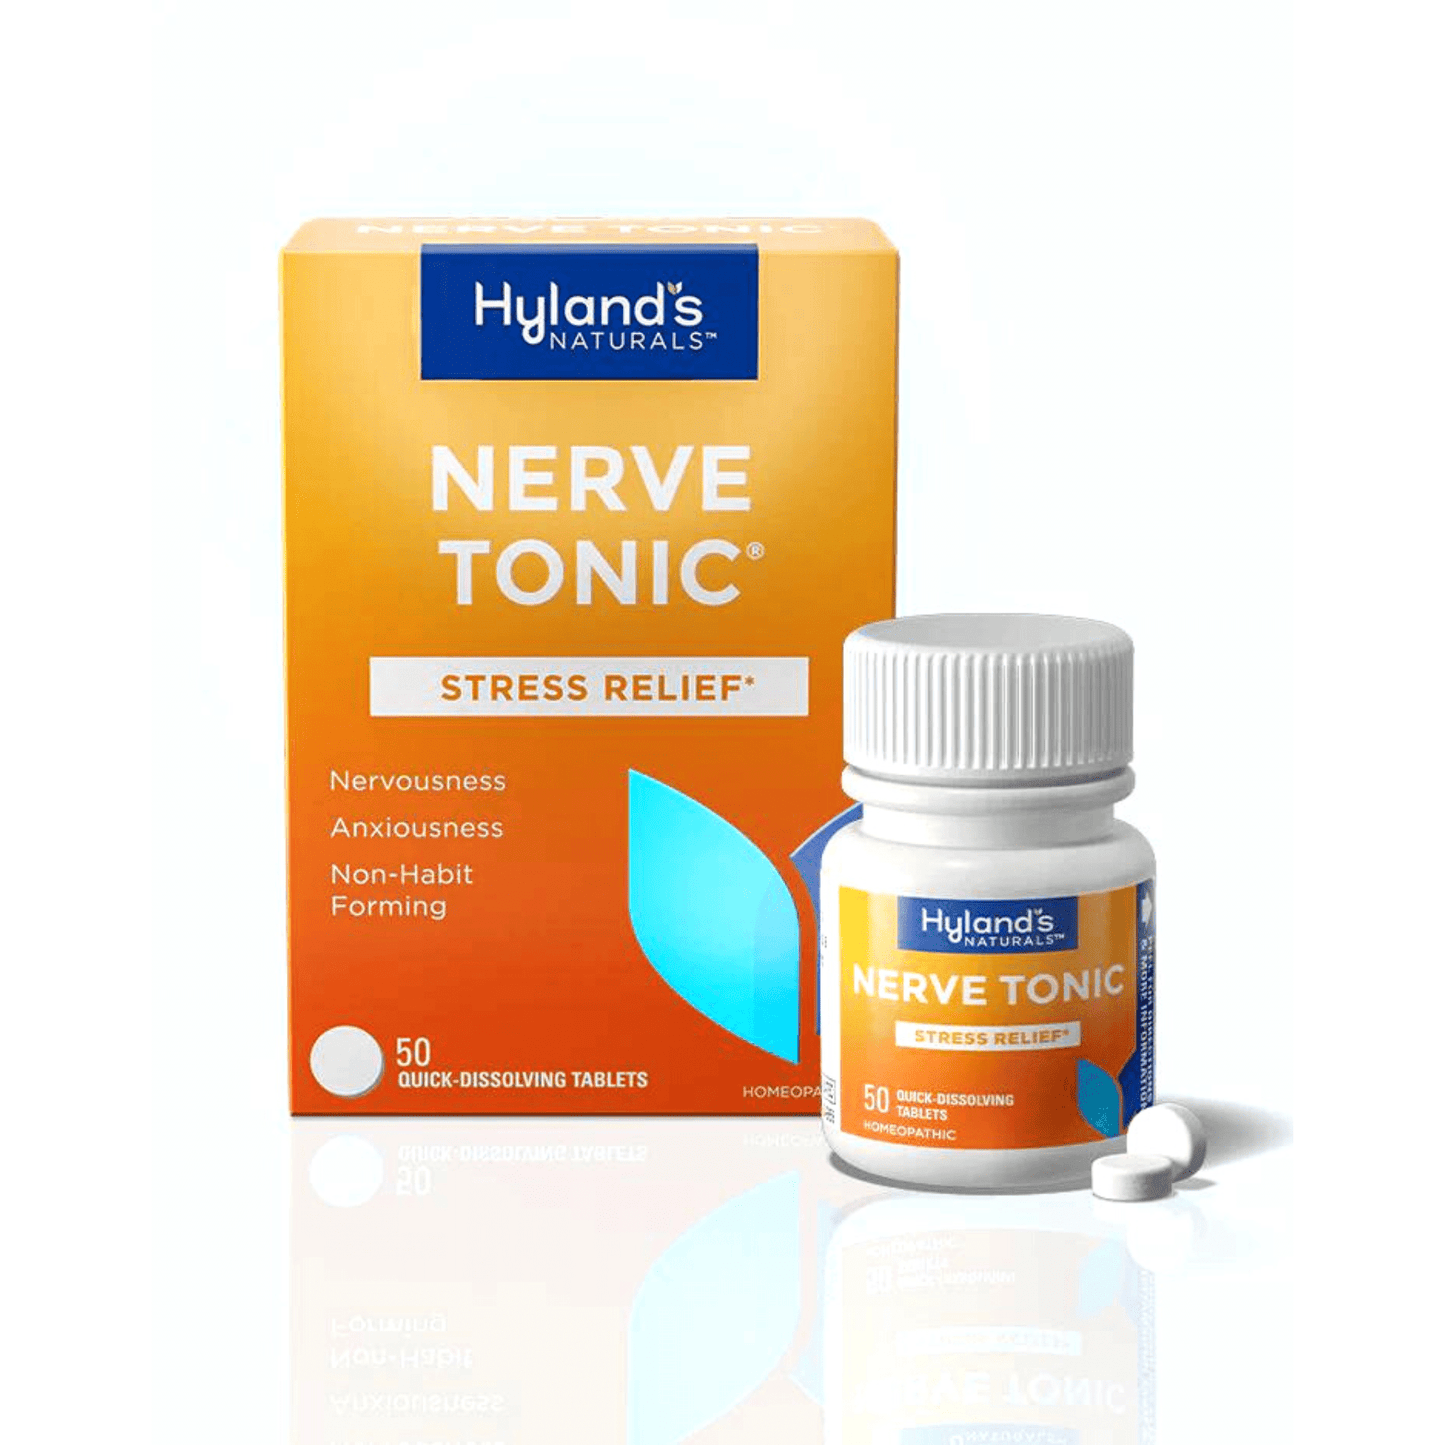 Primary Image of Nerve Tonic Tablets